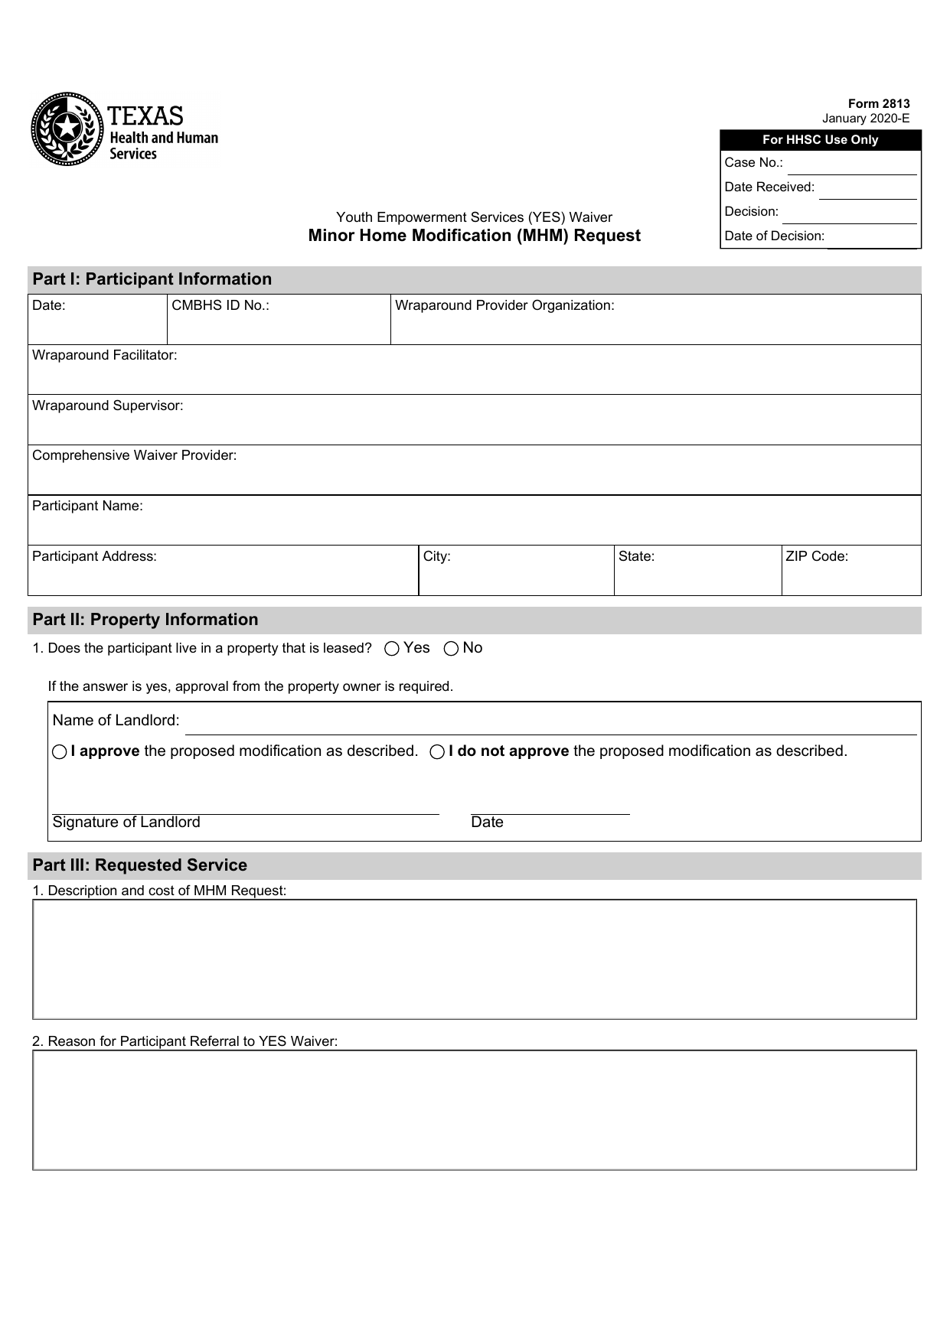 Form 2813 Youth Empowerment Services (Yes) Waiver Minor Home Modification (Mhm) Request - Texas, Page 1